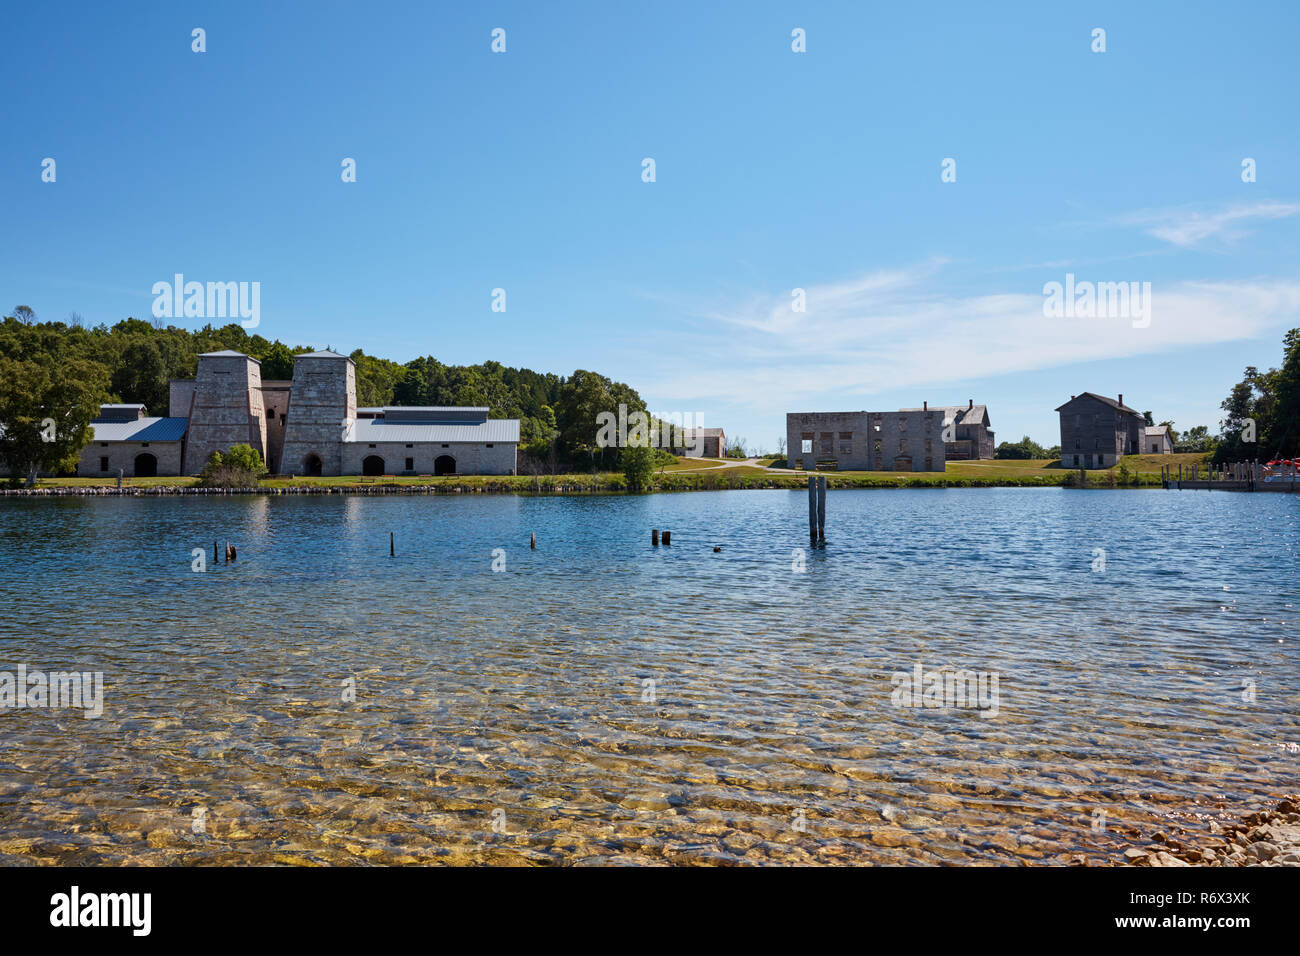 The Furnace and Company Store building ruins seen across the harbor in Fayette Historic State Park, Michigan Stock Photo